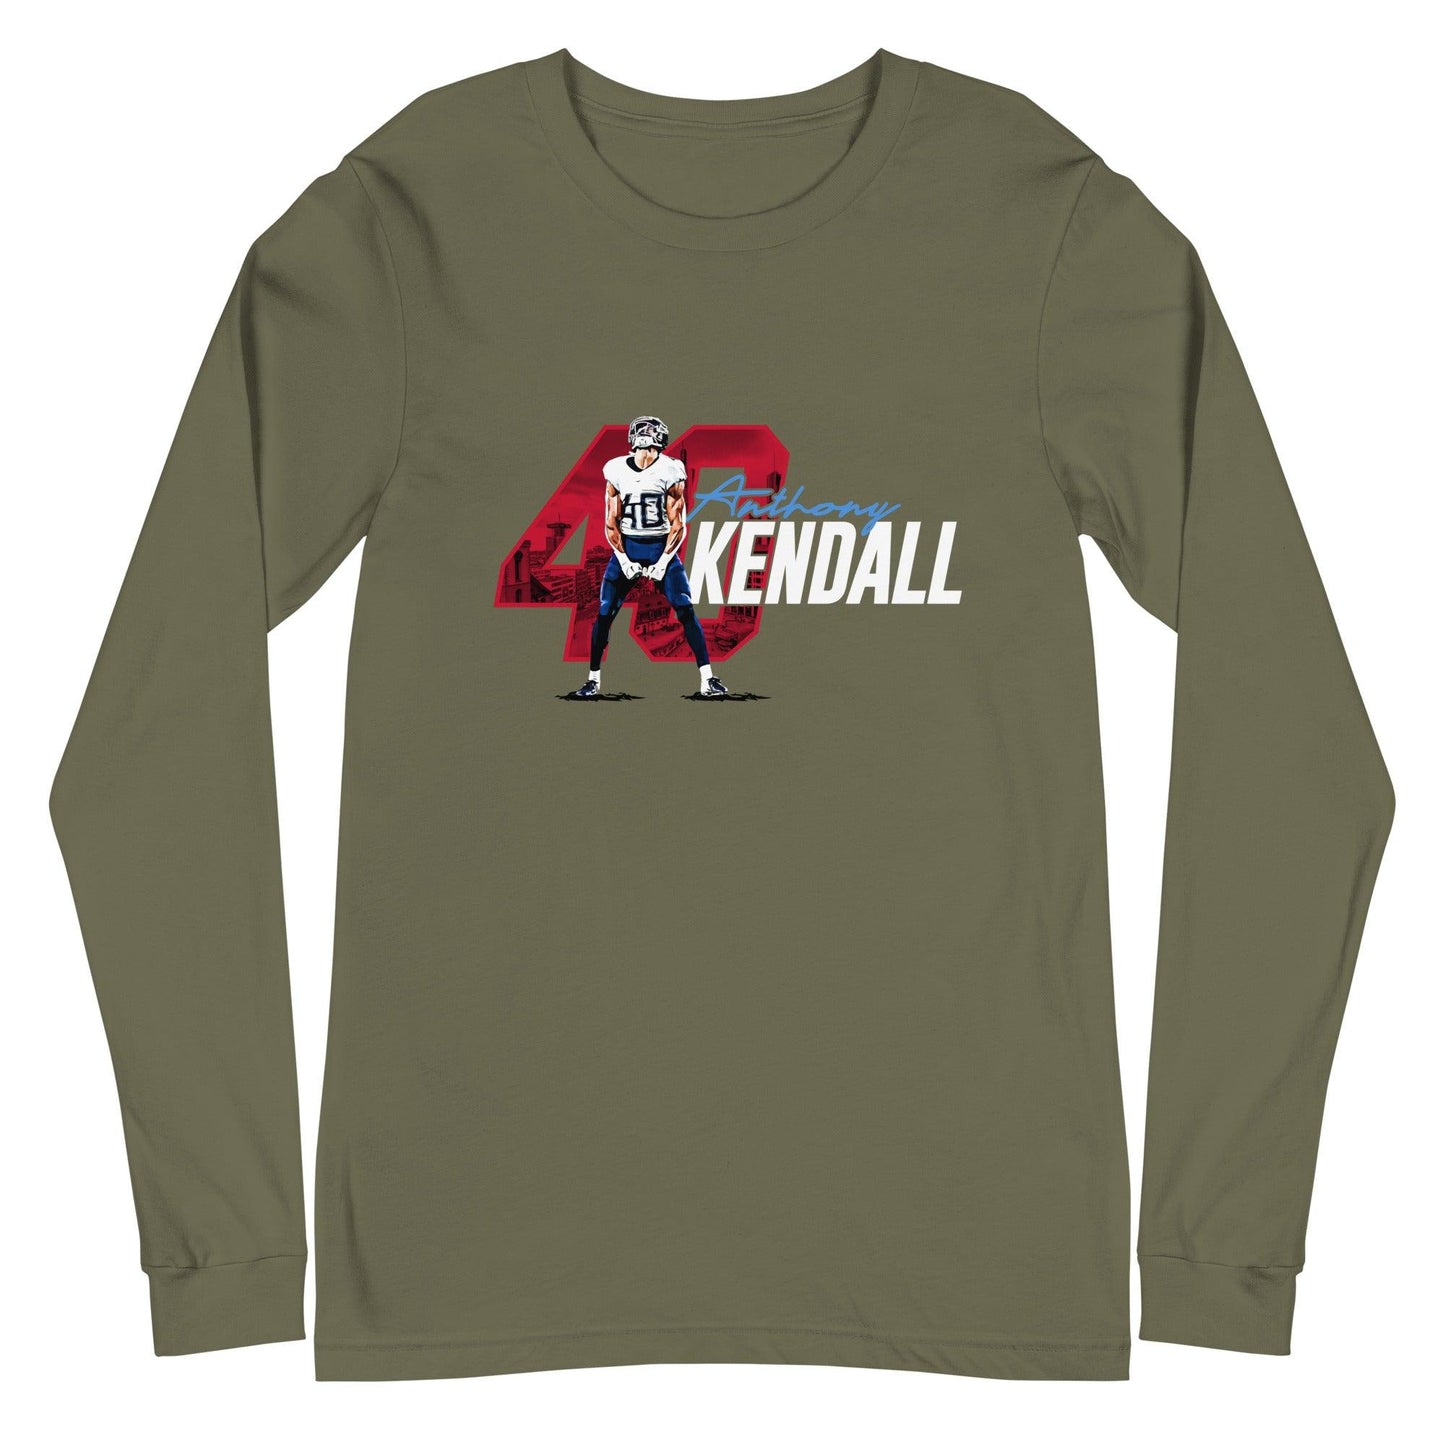 Anthony Kendall "Gameday" Long Sleeve Tee - Fan Arch